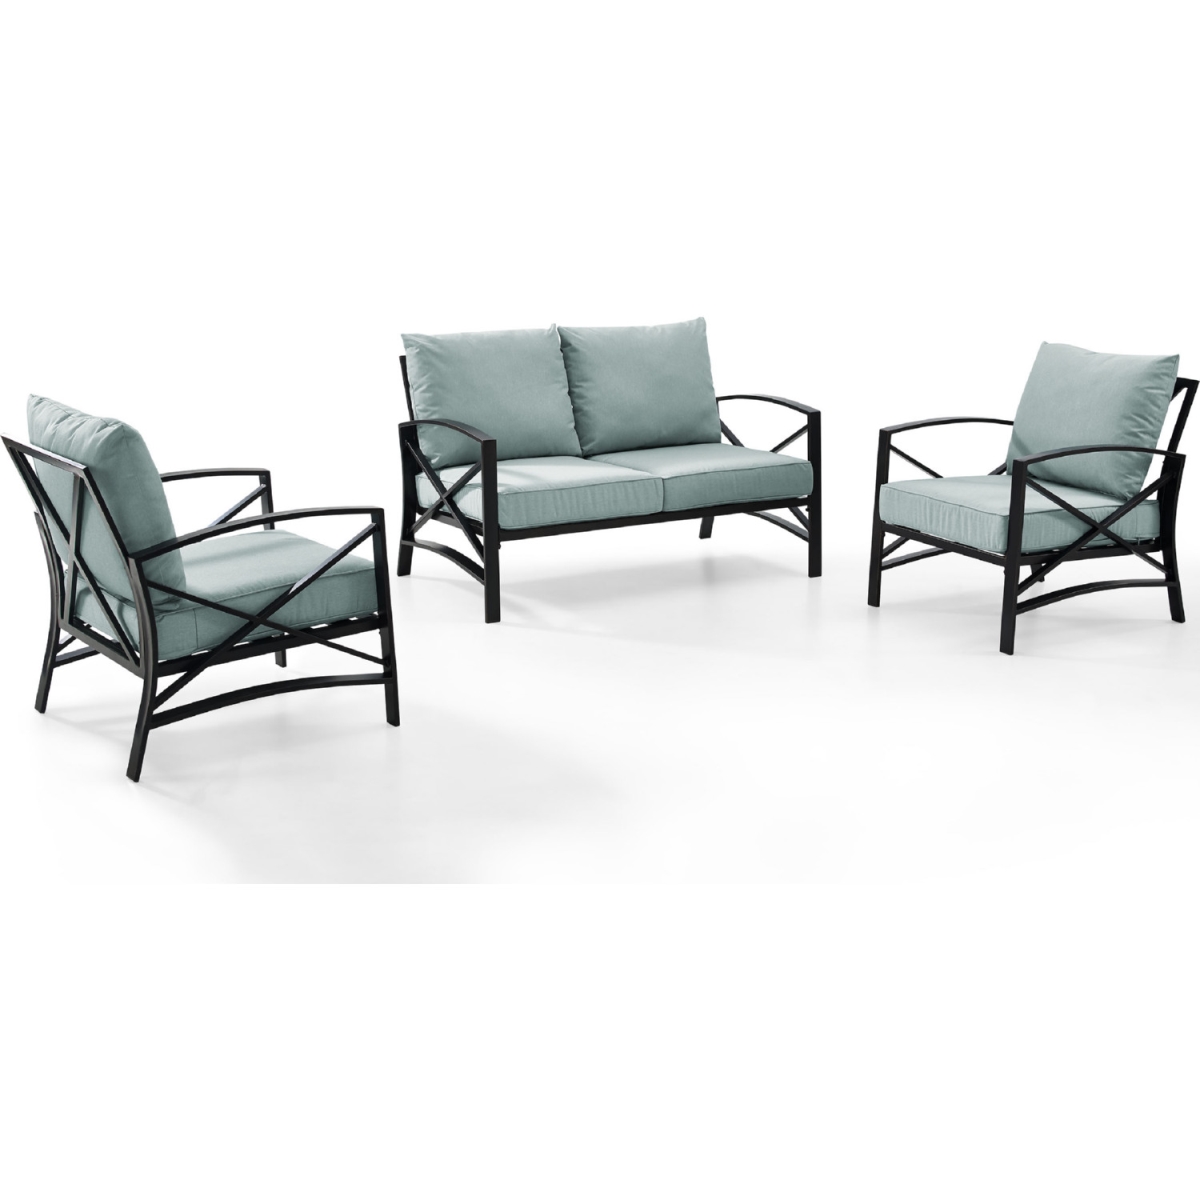 3 Piece Kaplan Outdoor Seating Set With Mist Cushion - Loveseat, Two Kaplan Outdoor Chairs